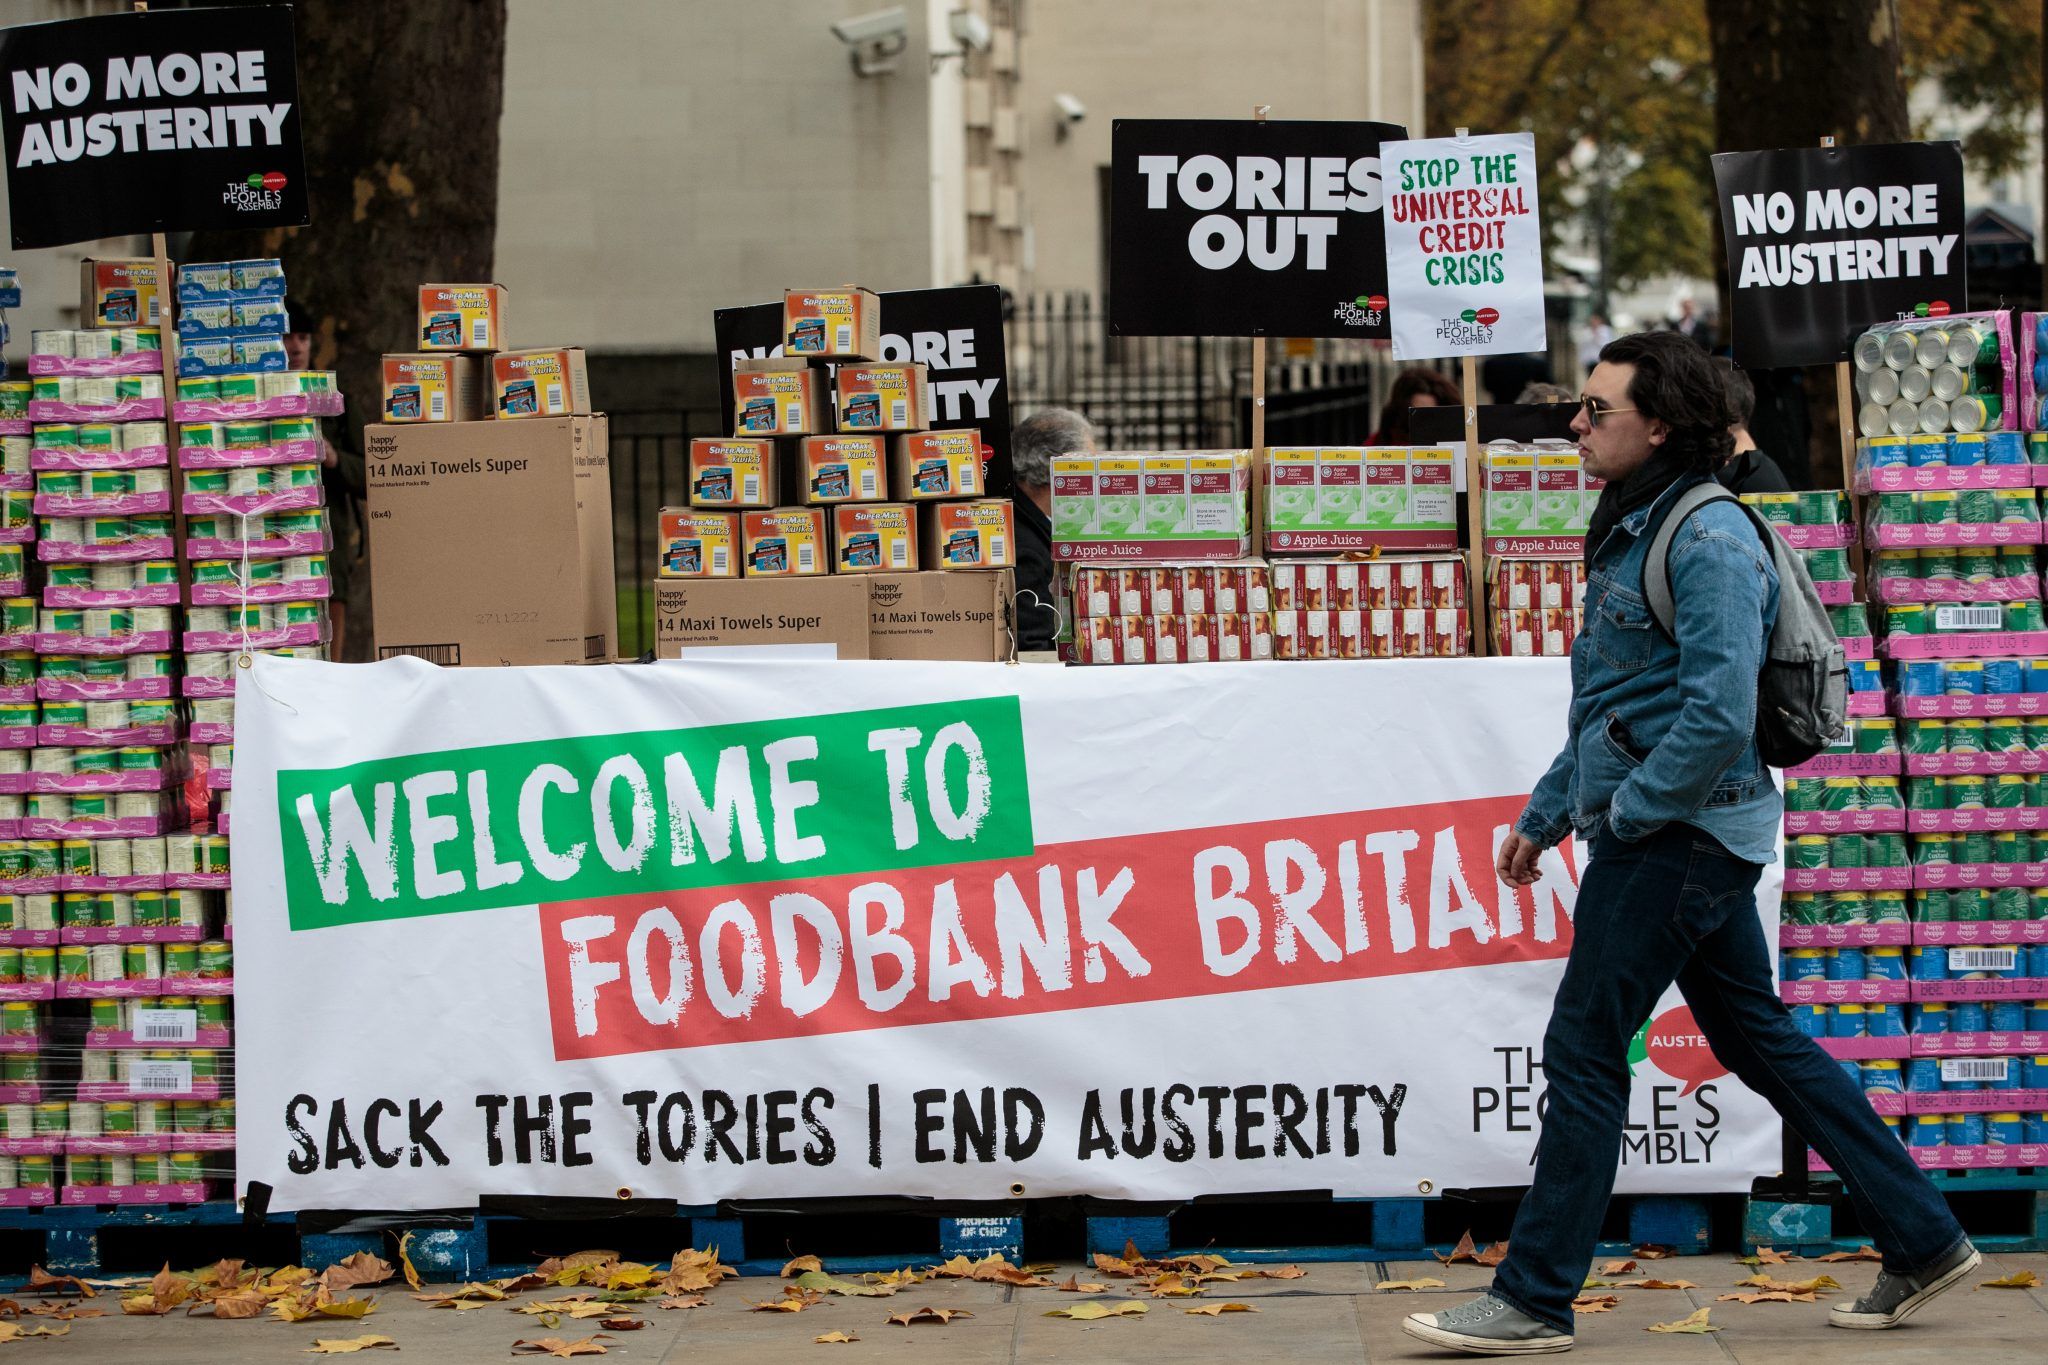 Welcome to food bank Britain (Credit: Getty)